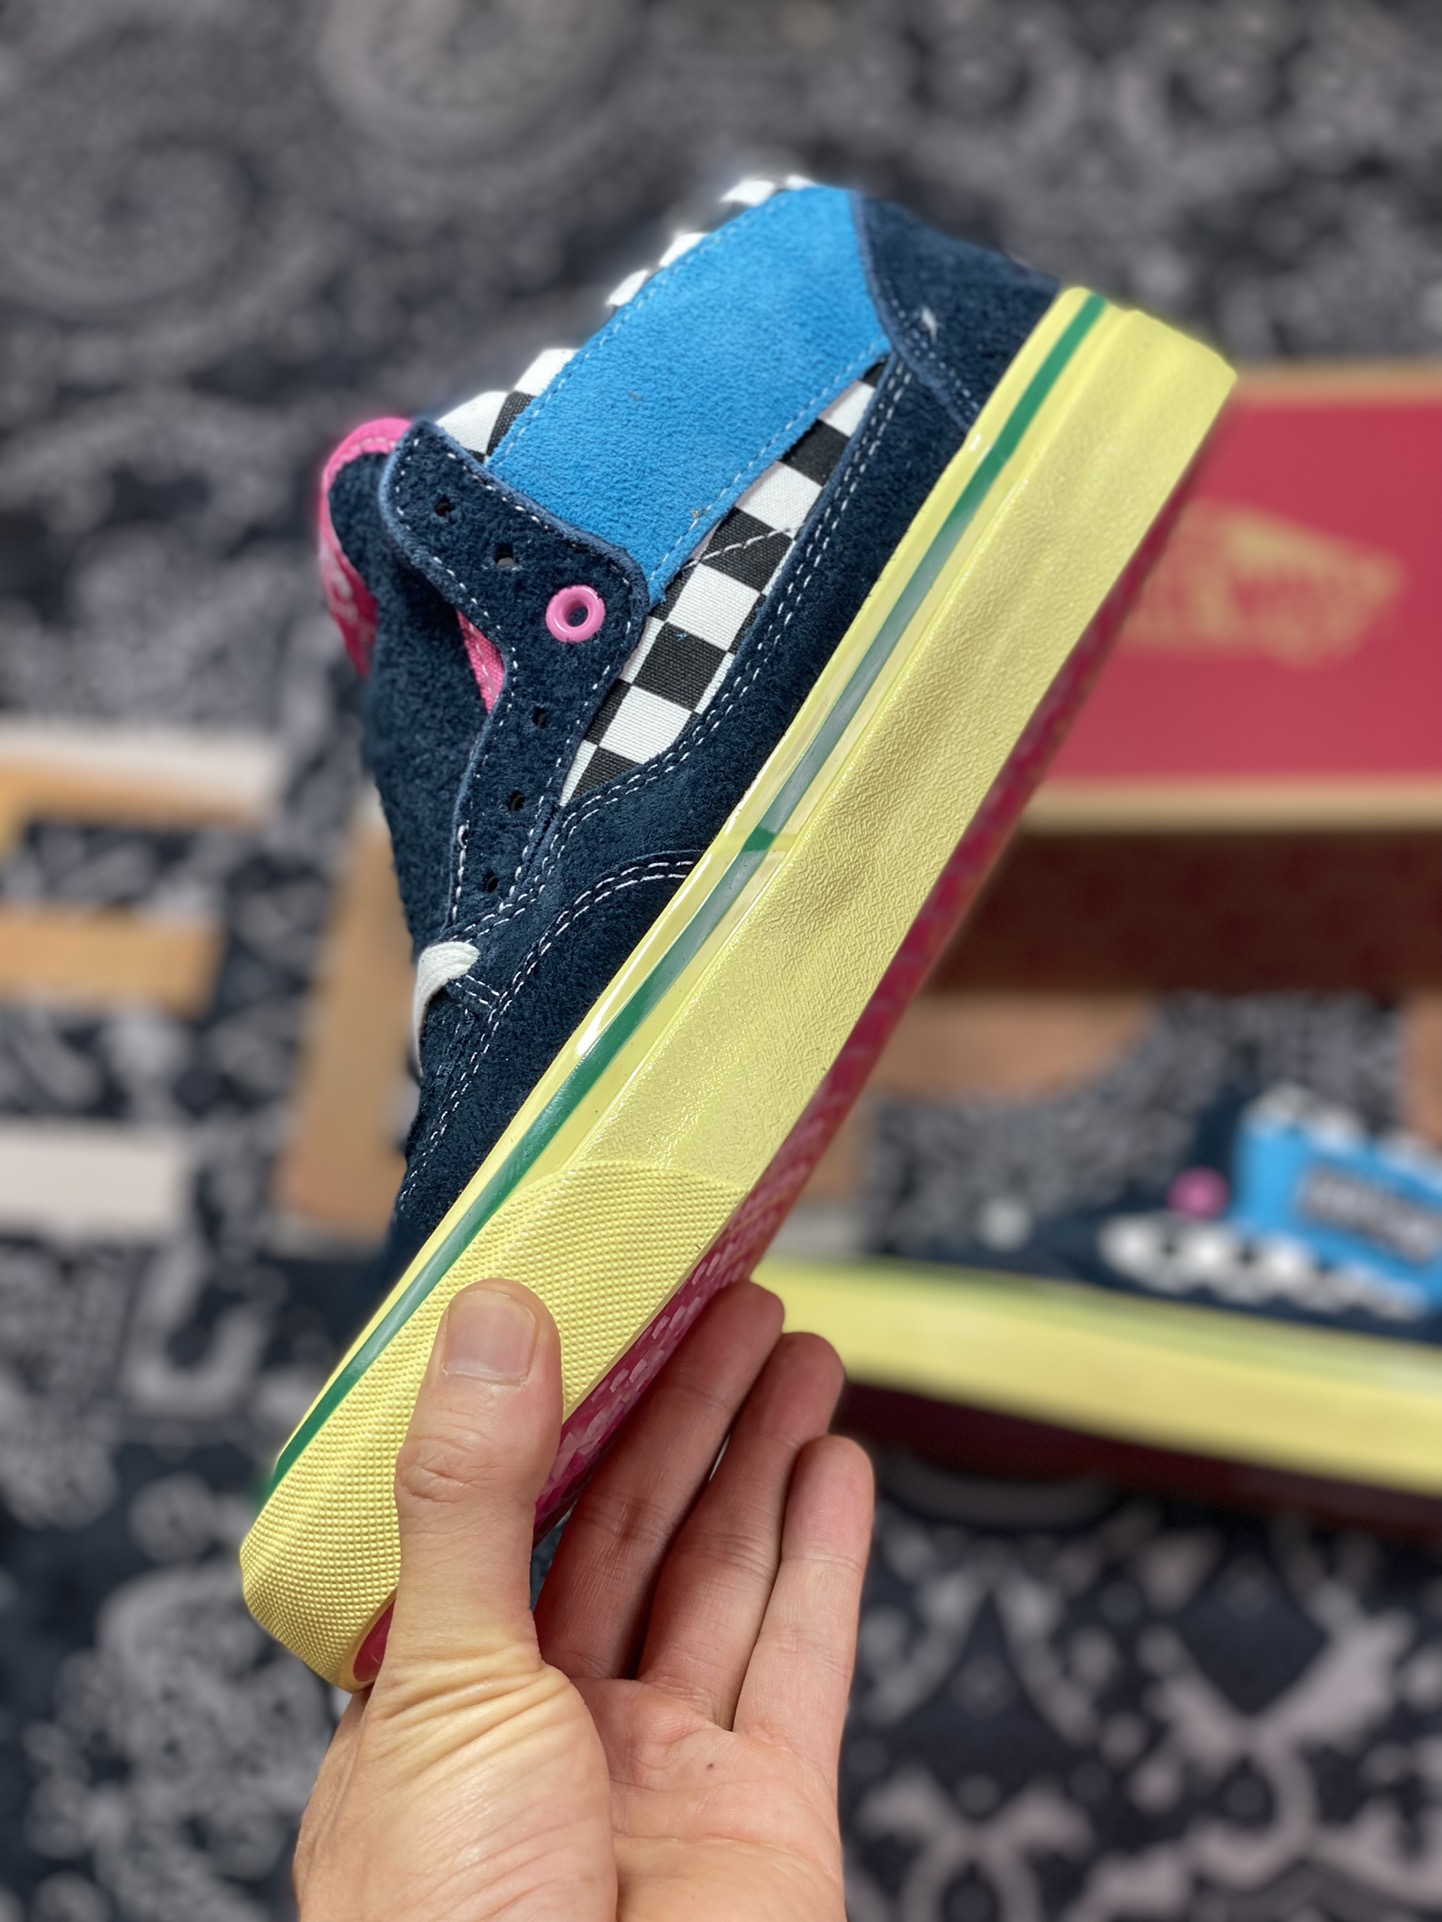 The Liberaiders x Vans Half Cab 33 DX is made of washed suede